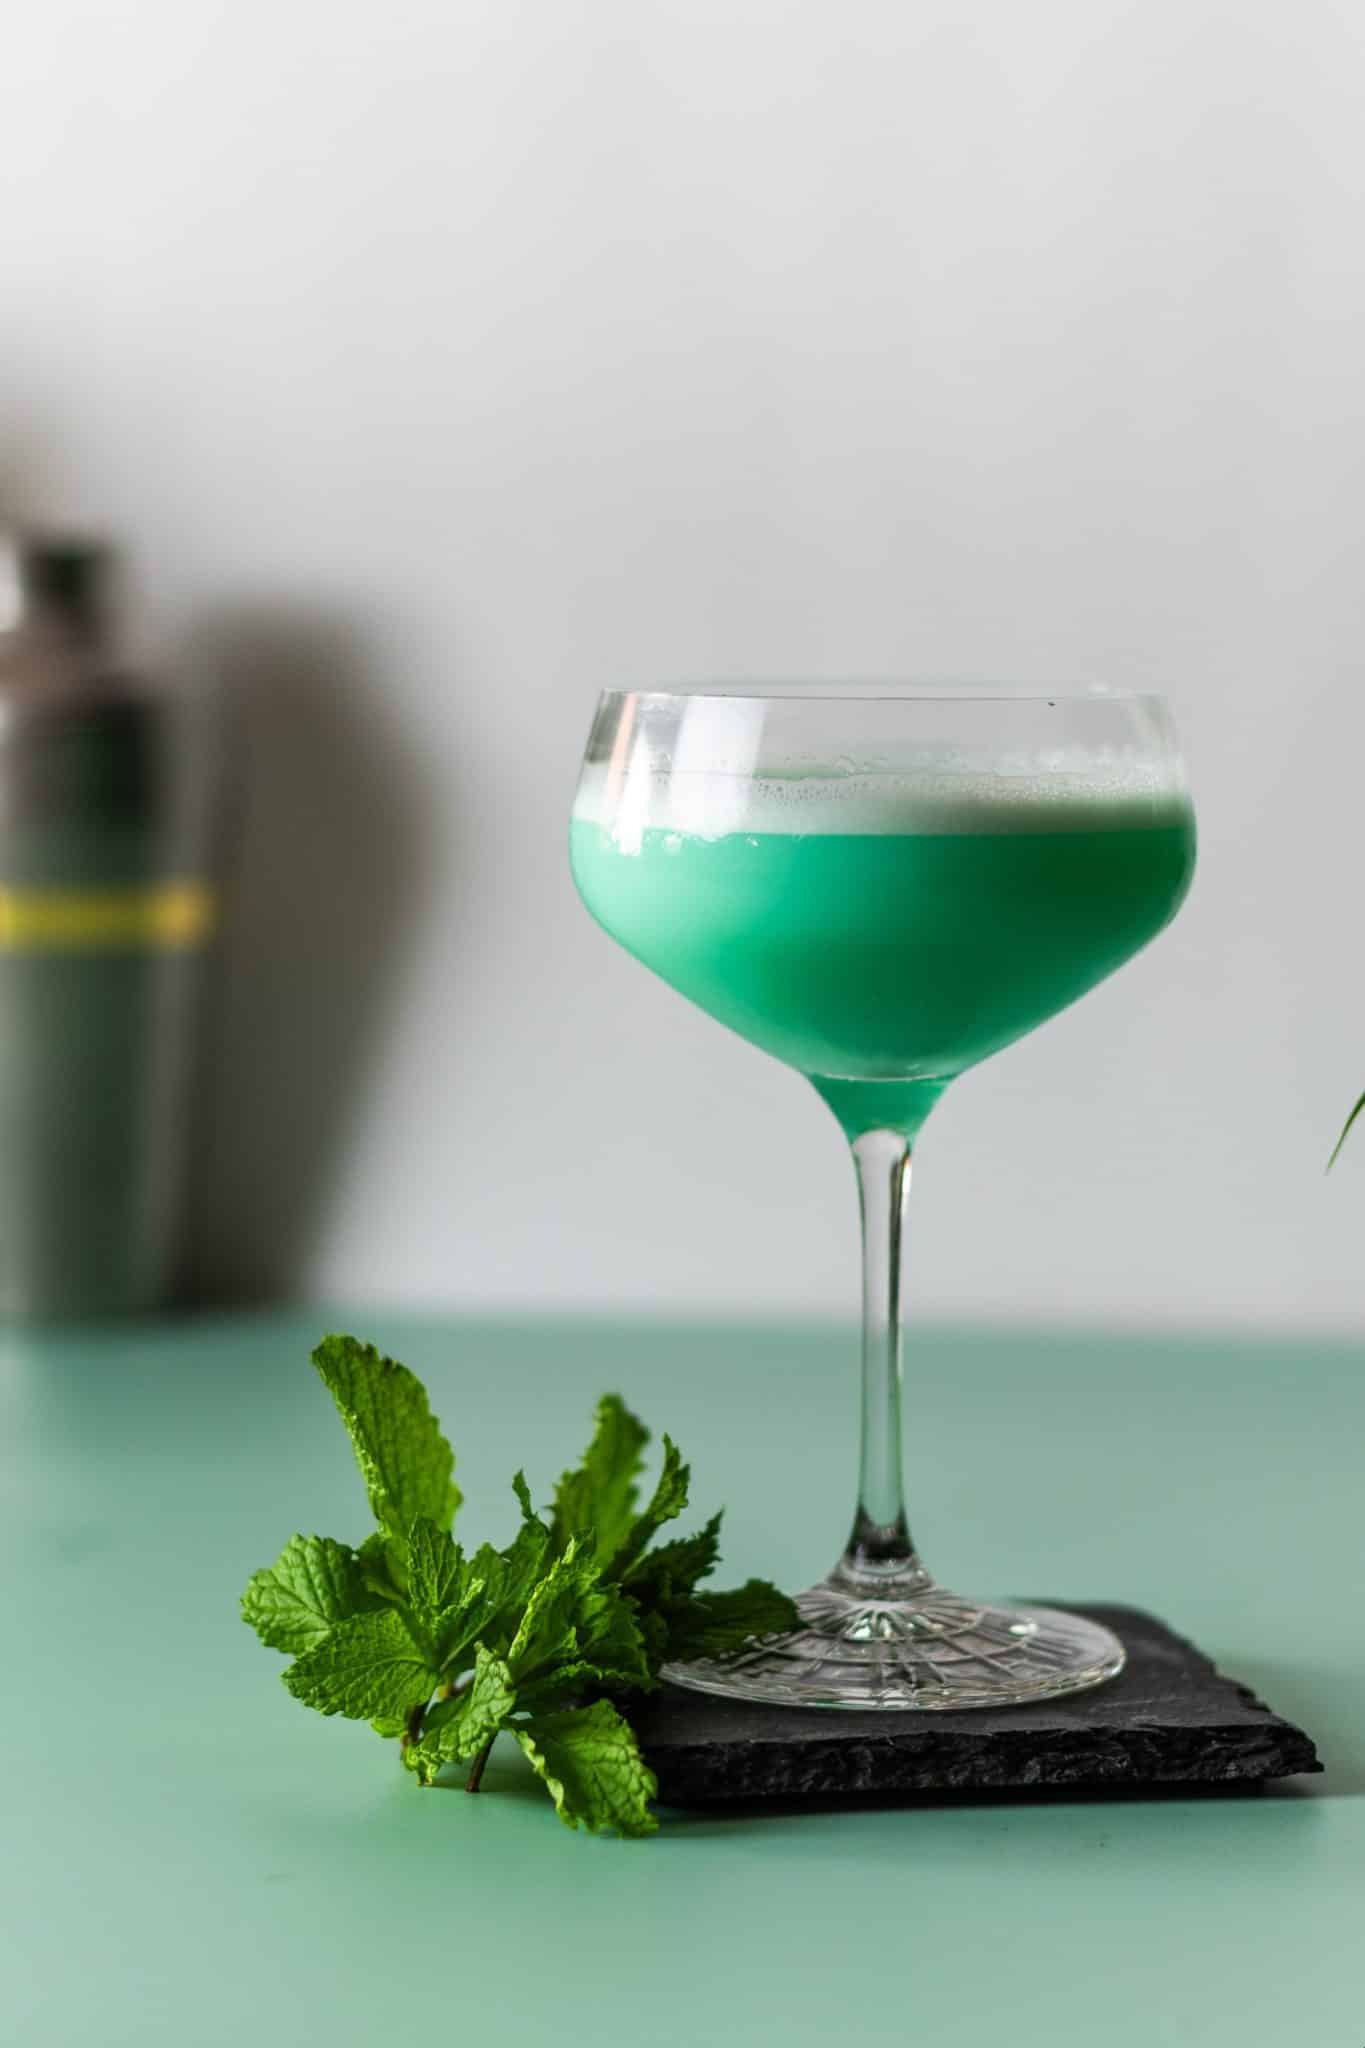 A side shot of a Grasshopper cocktail in a martini glass with a mint sprig on a black stone plate placed on a green table with a shaker on the background.